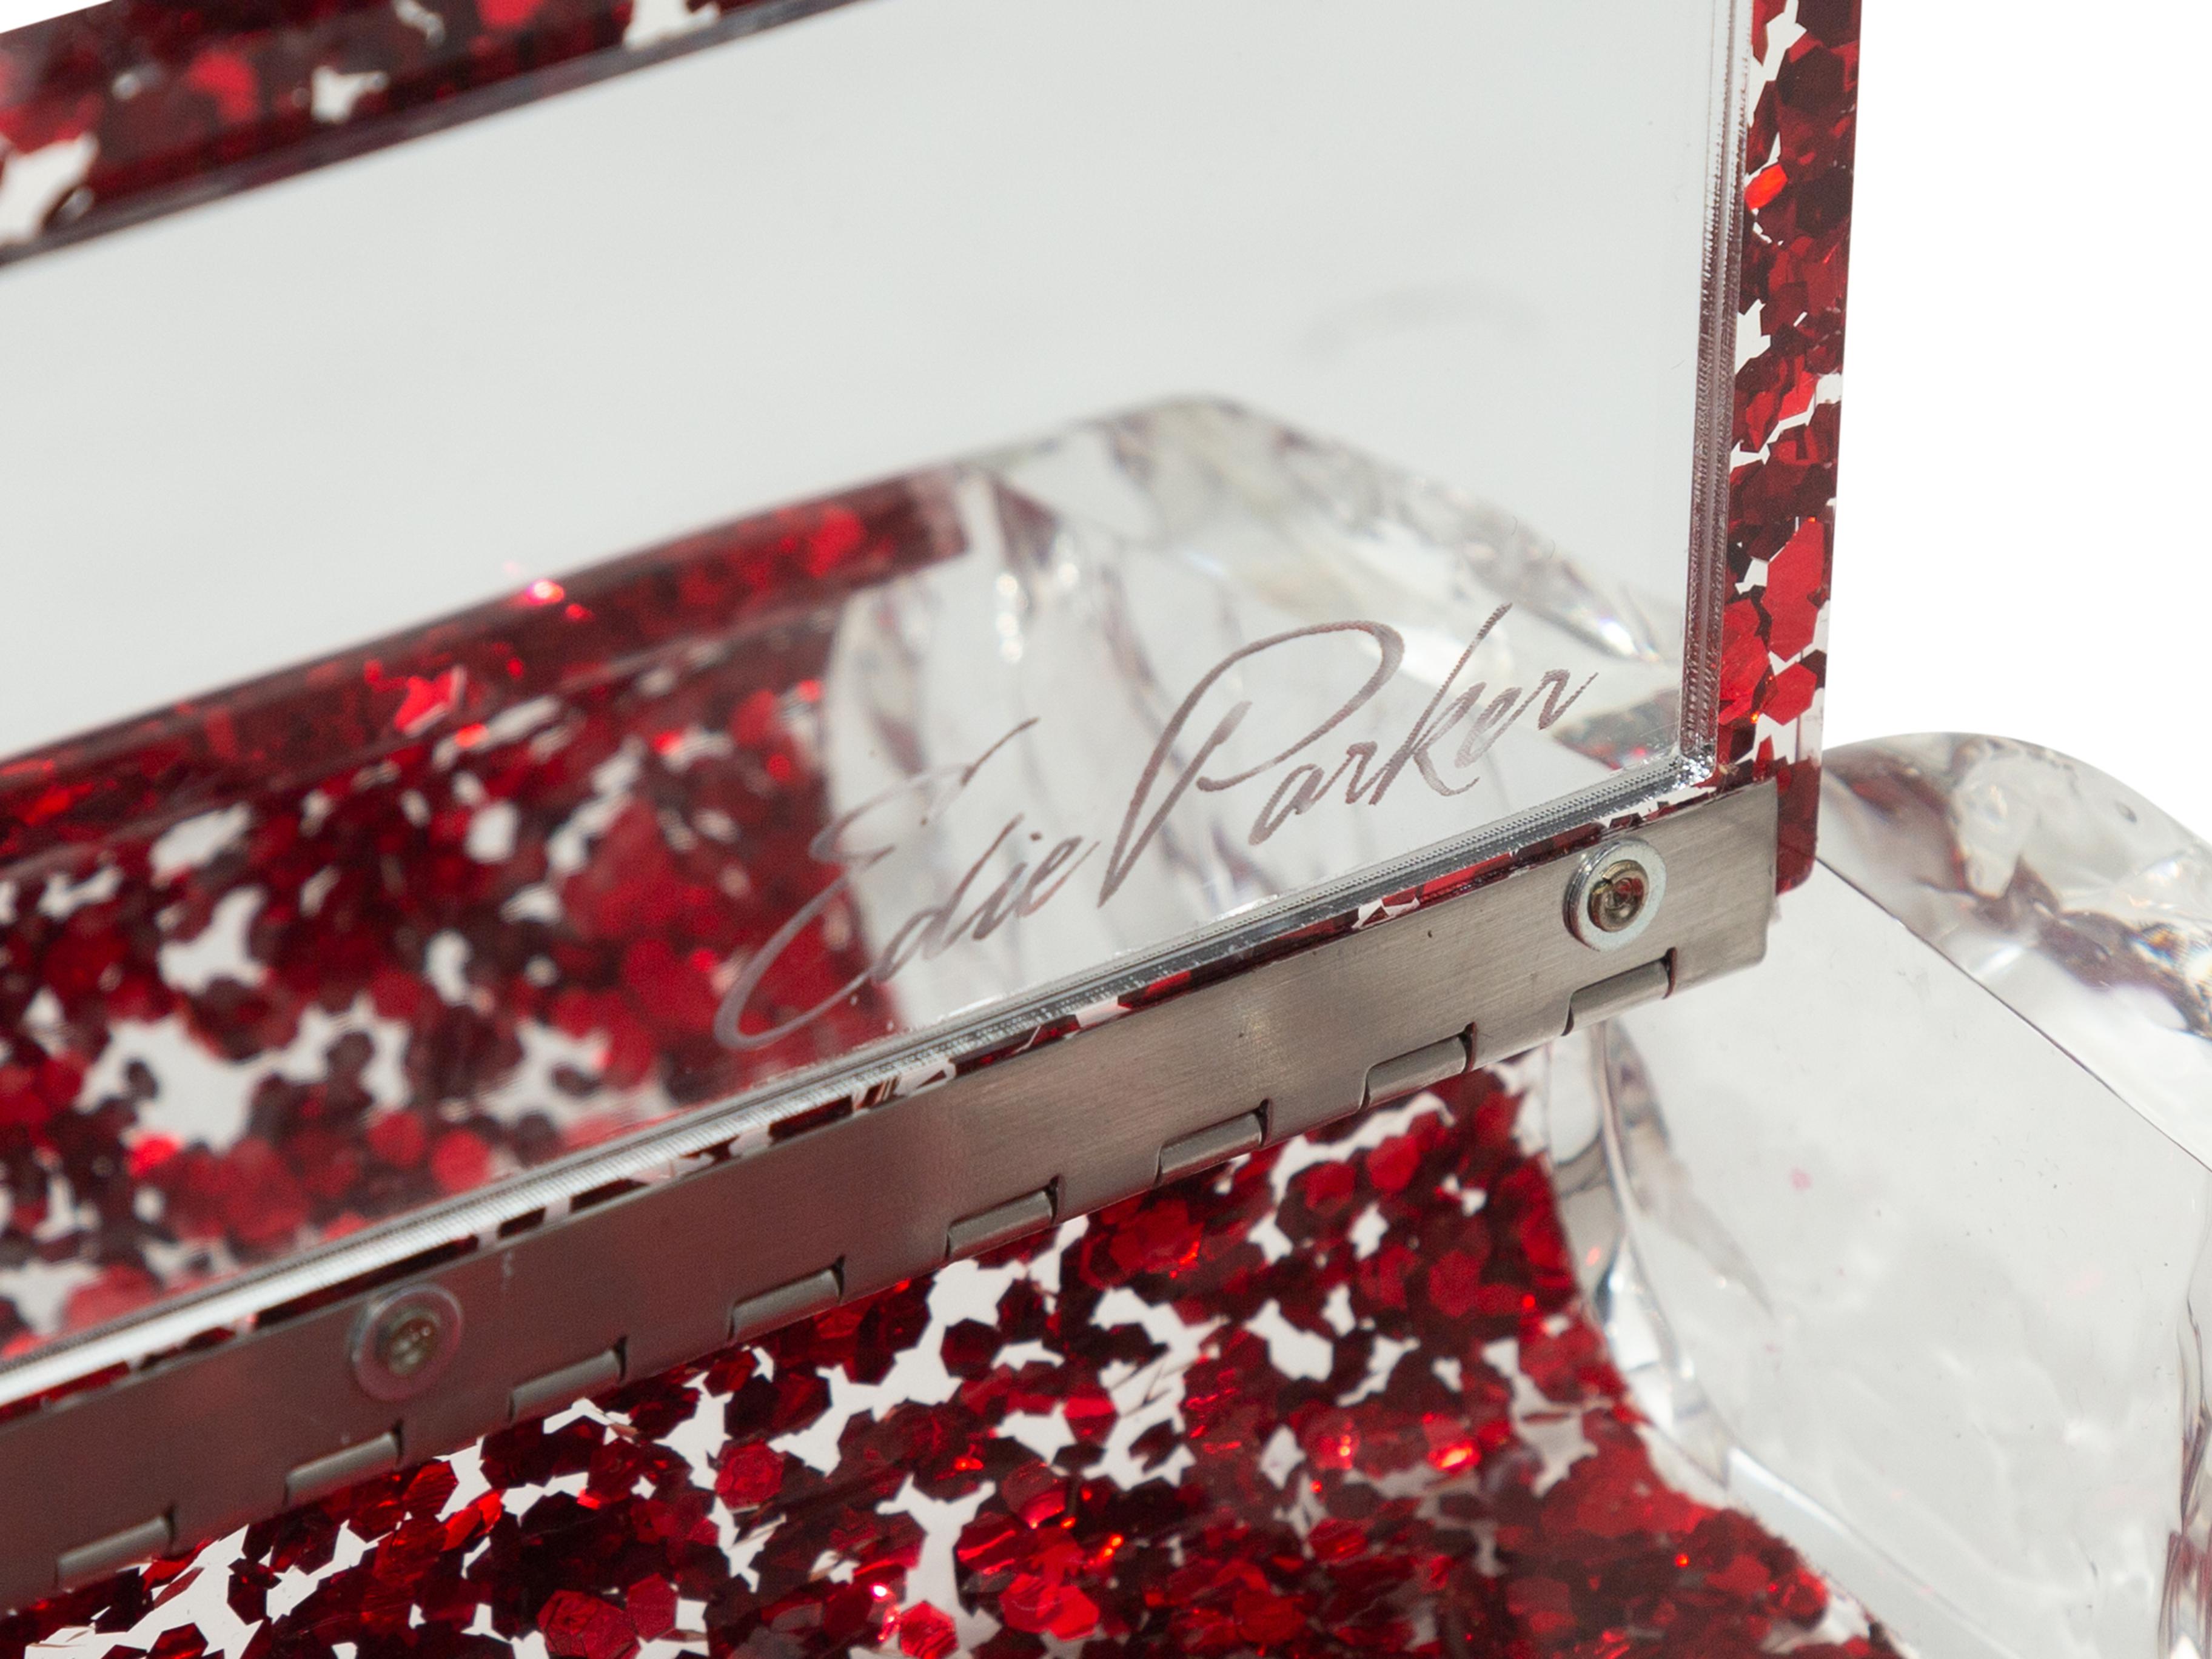 Product details: Red & Transluscent Edie Parker Lara Lucite Clutch. This bag features a lucite body, silver-tone hardware, and a front clasp closure. 8